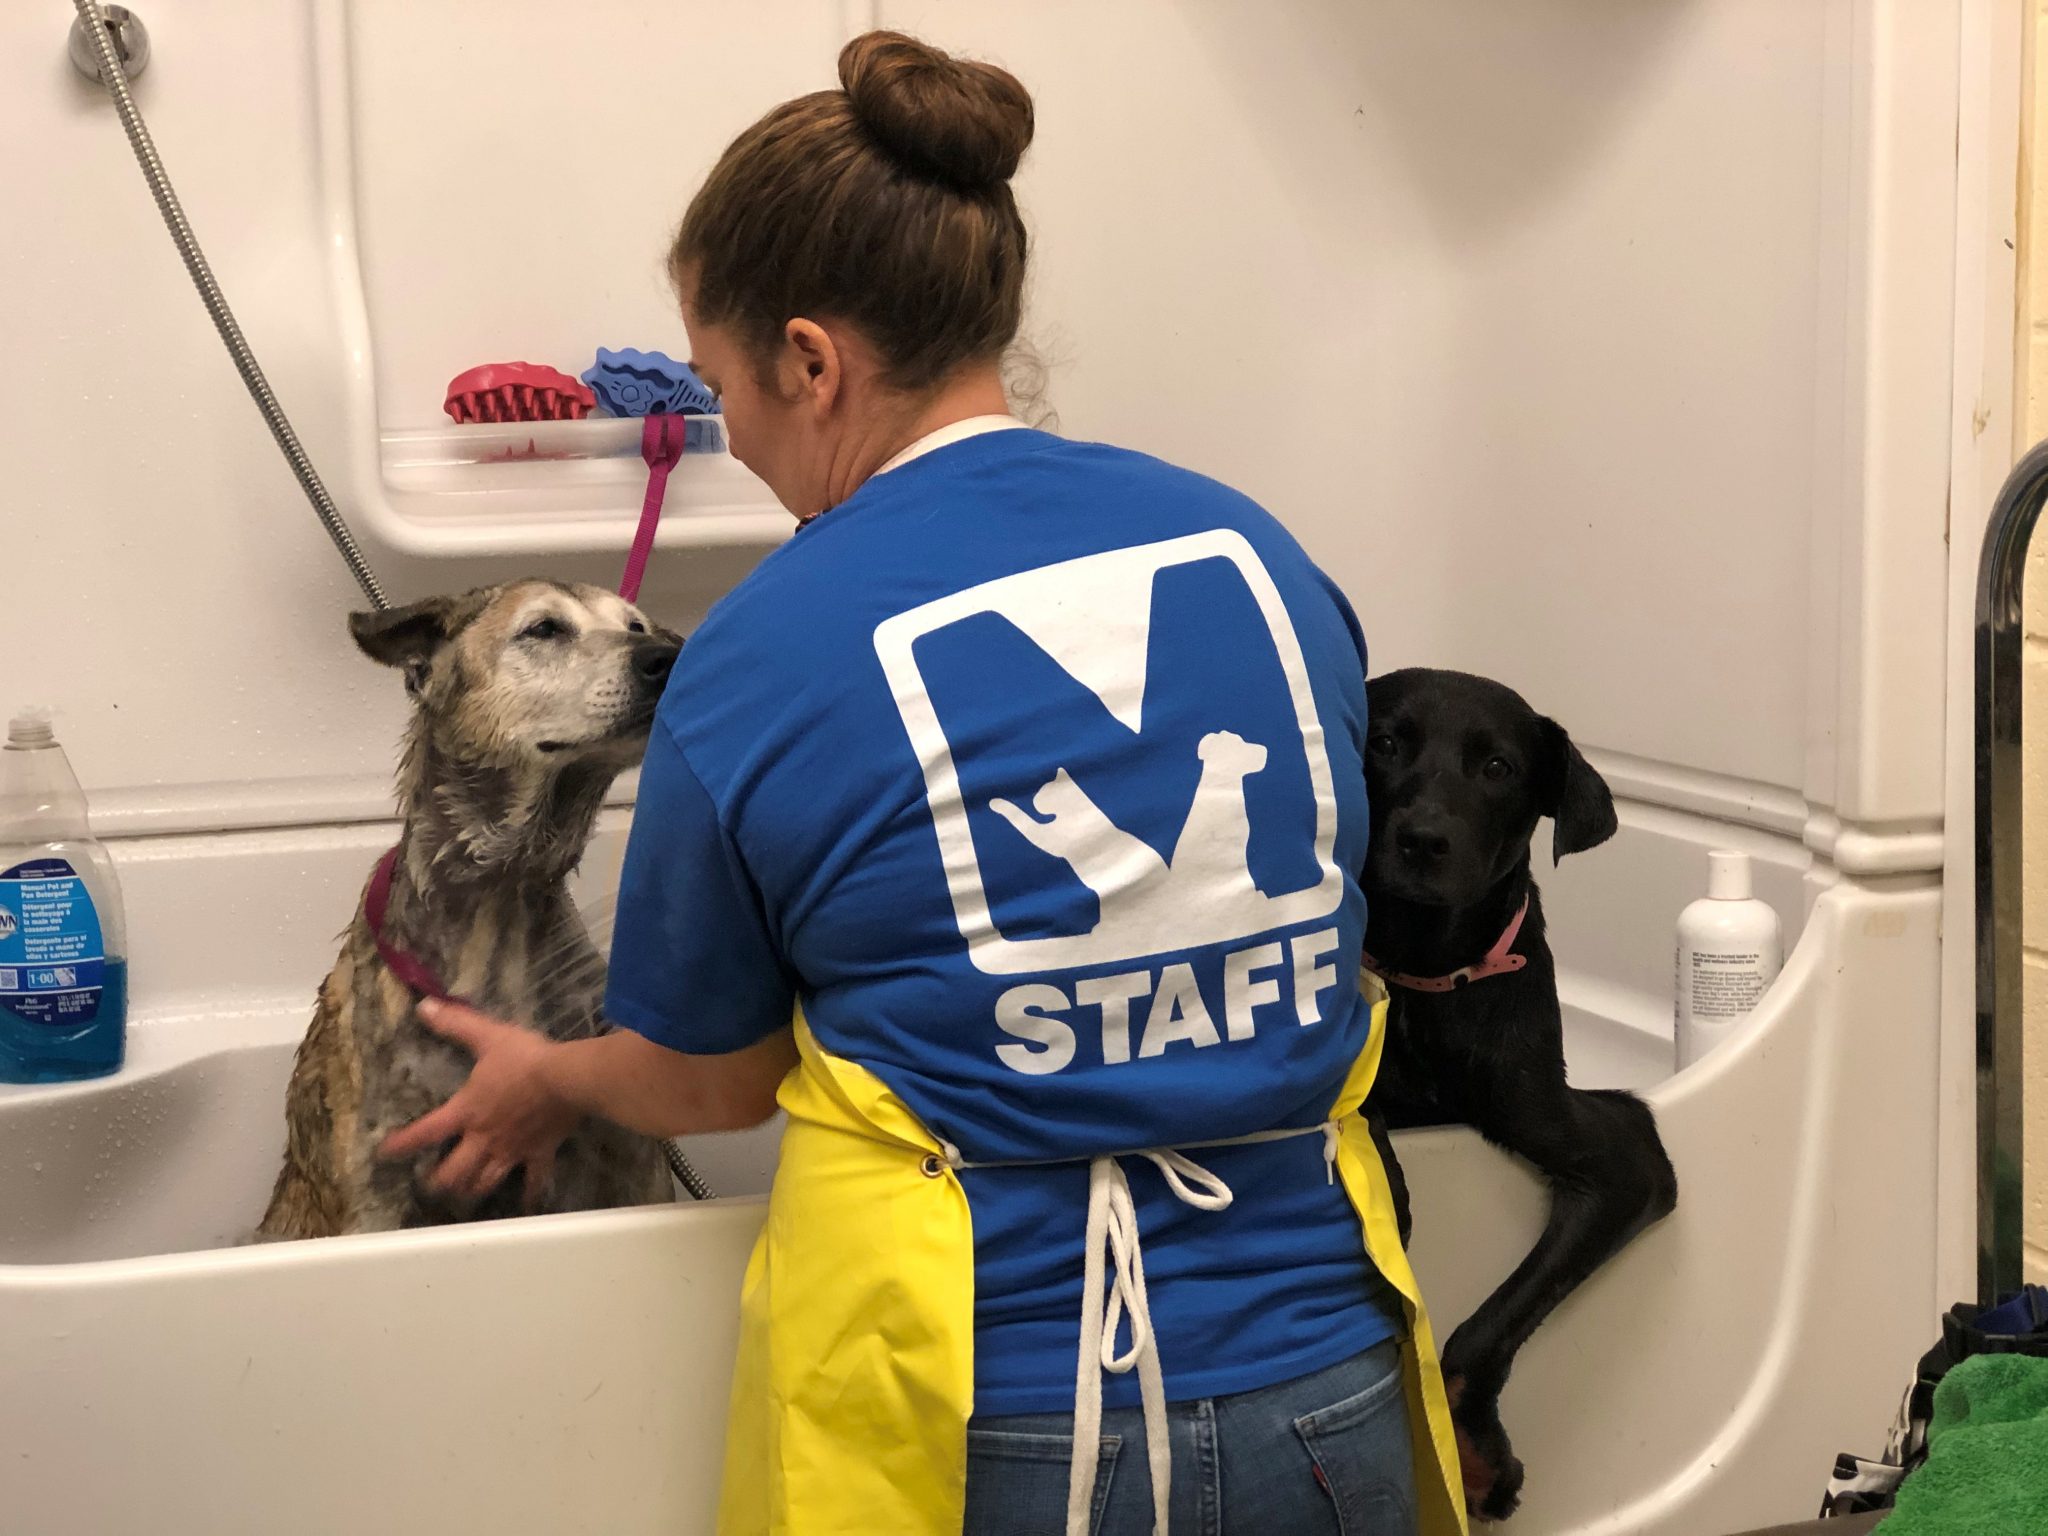 Two dogs are being bathed by a woman in a blue apron during pet care.